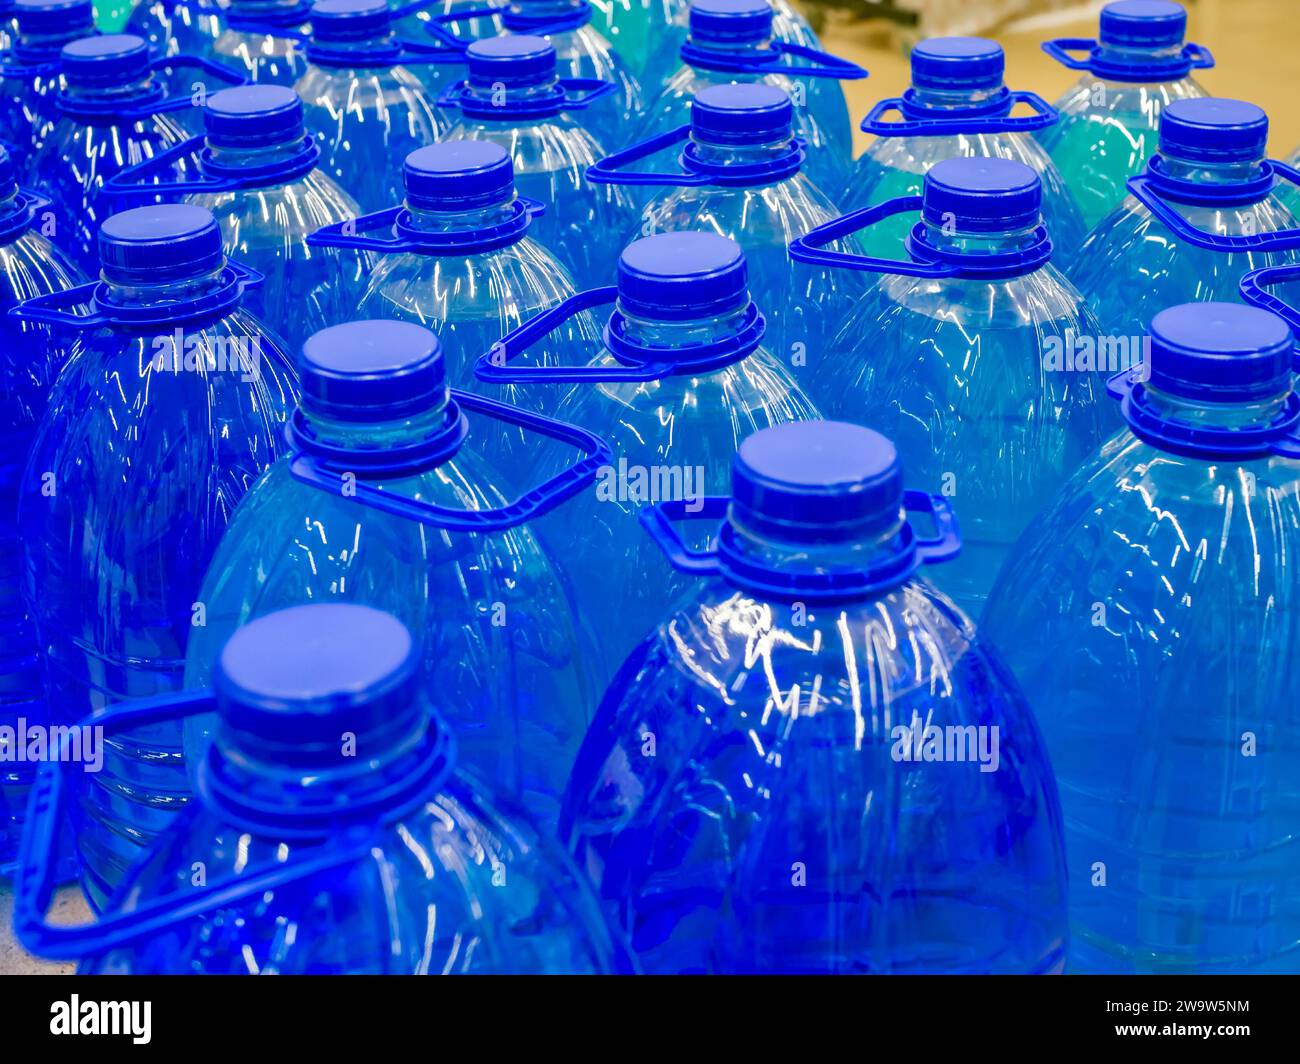 Plastic bottles with washer fluid Stock Photo